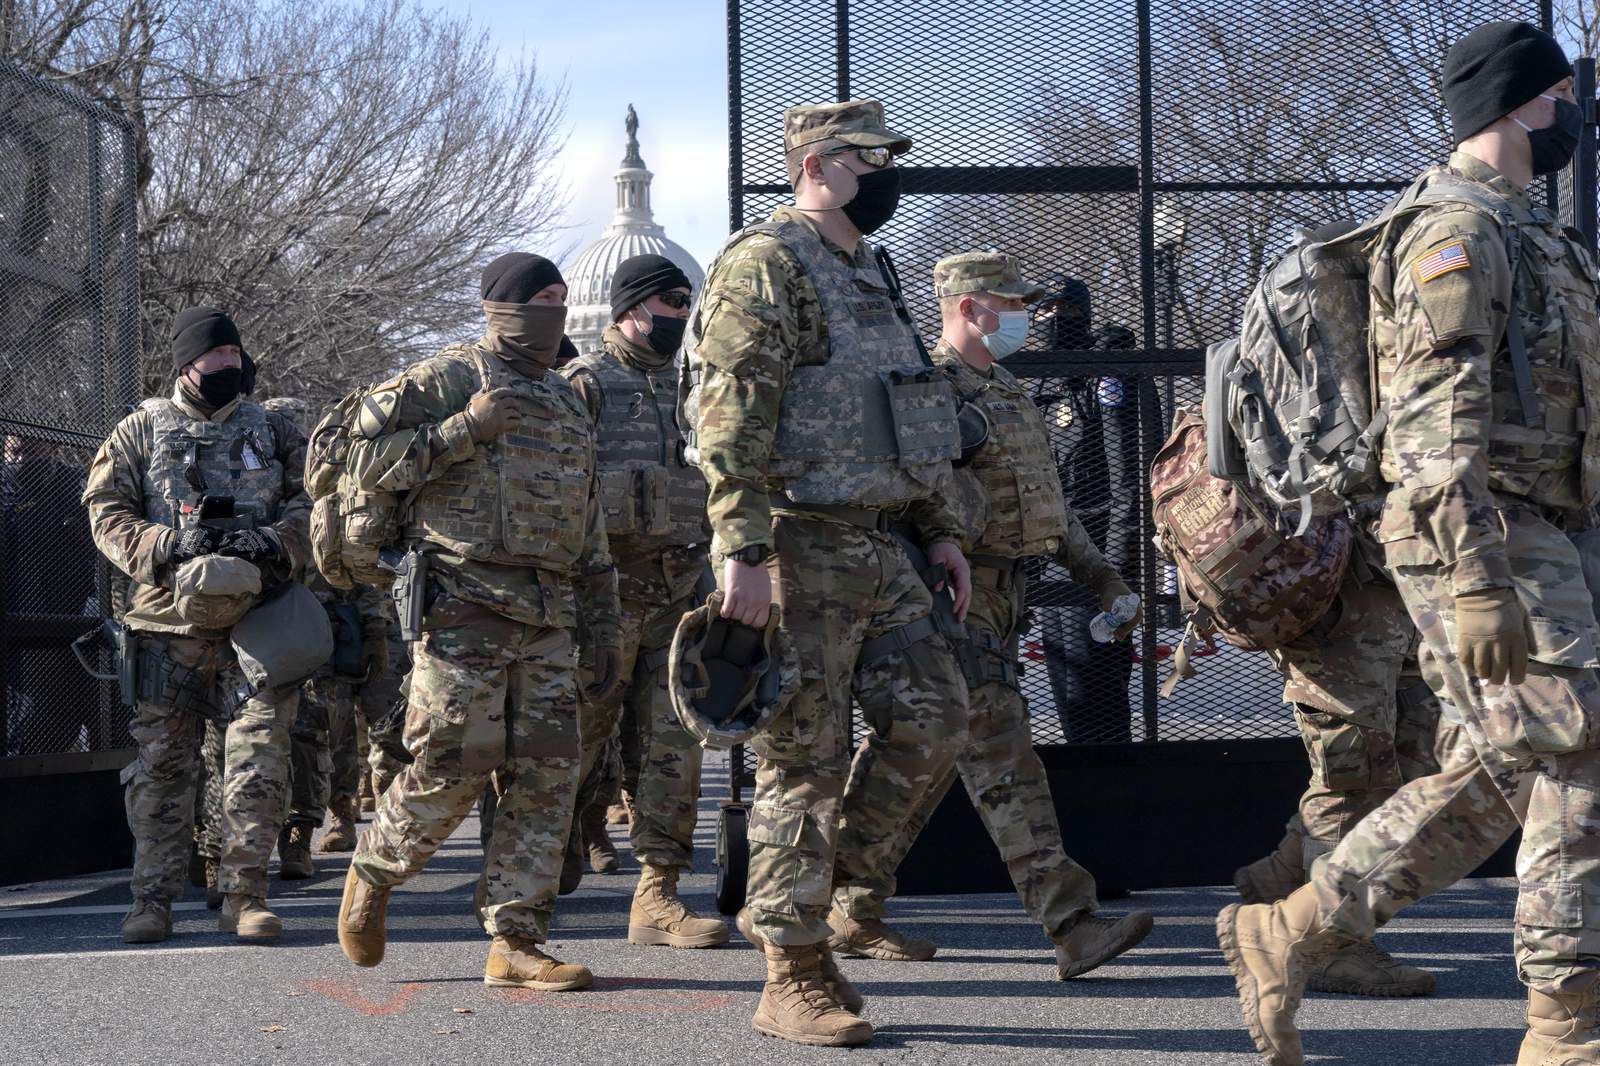 Guard troops pour into Washington as states answer the call